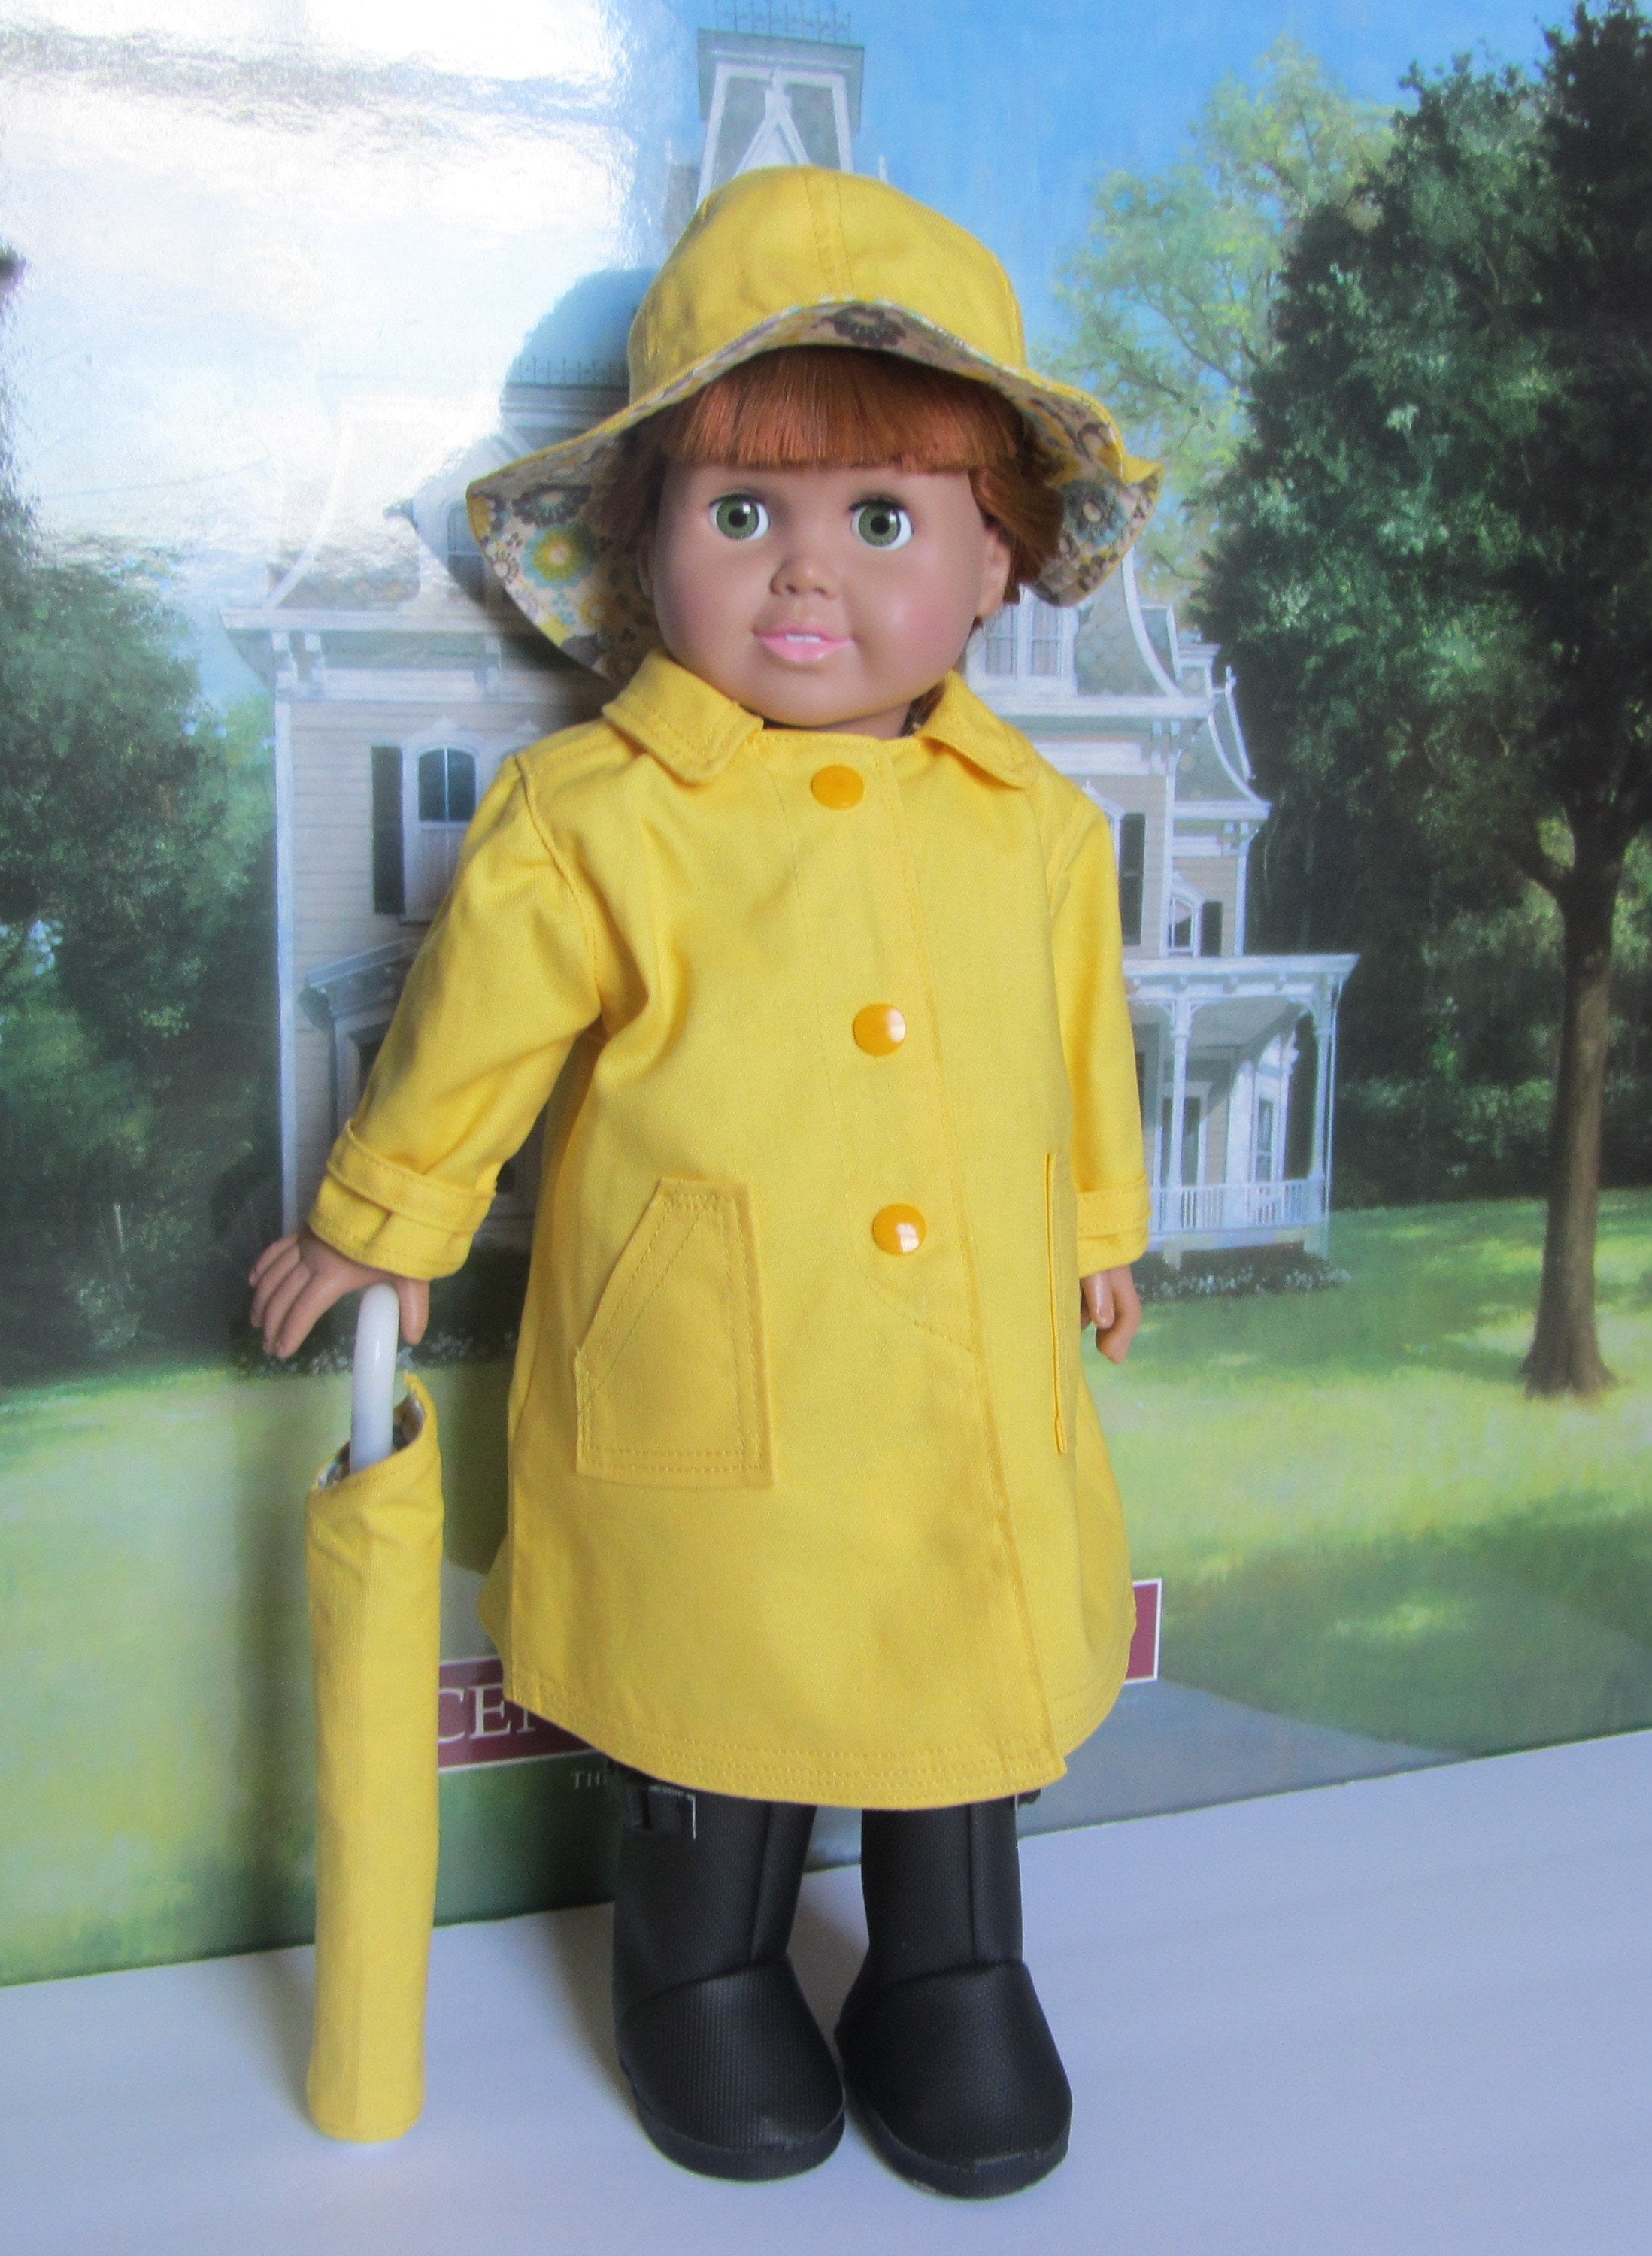 Yellow Rain Coat Boots & Umbrella made for 18 inch American Girl Doll Clothes 